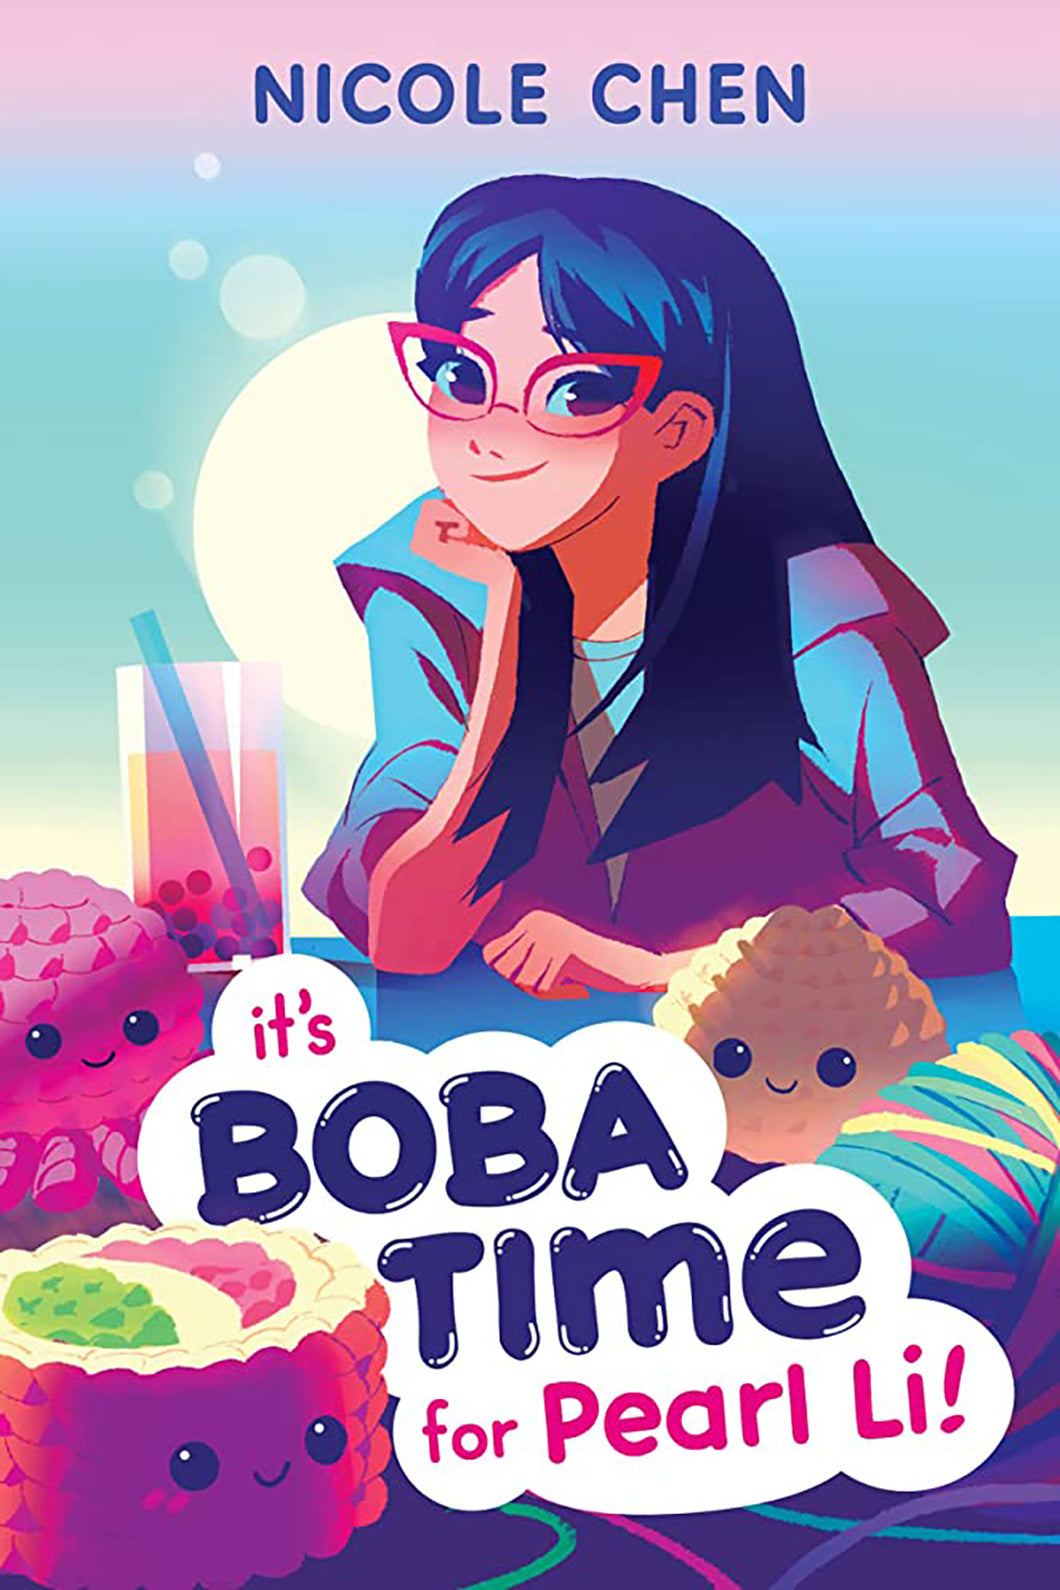 It's Boba Time for Pearl Li! by Nicole Chen / Hardcover - NEW BOOK